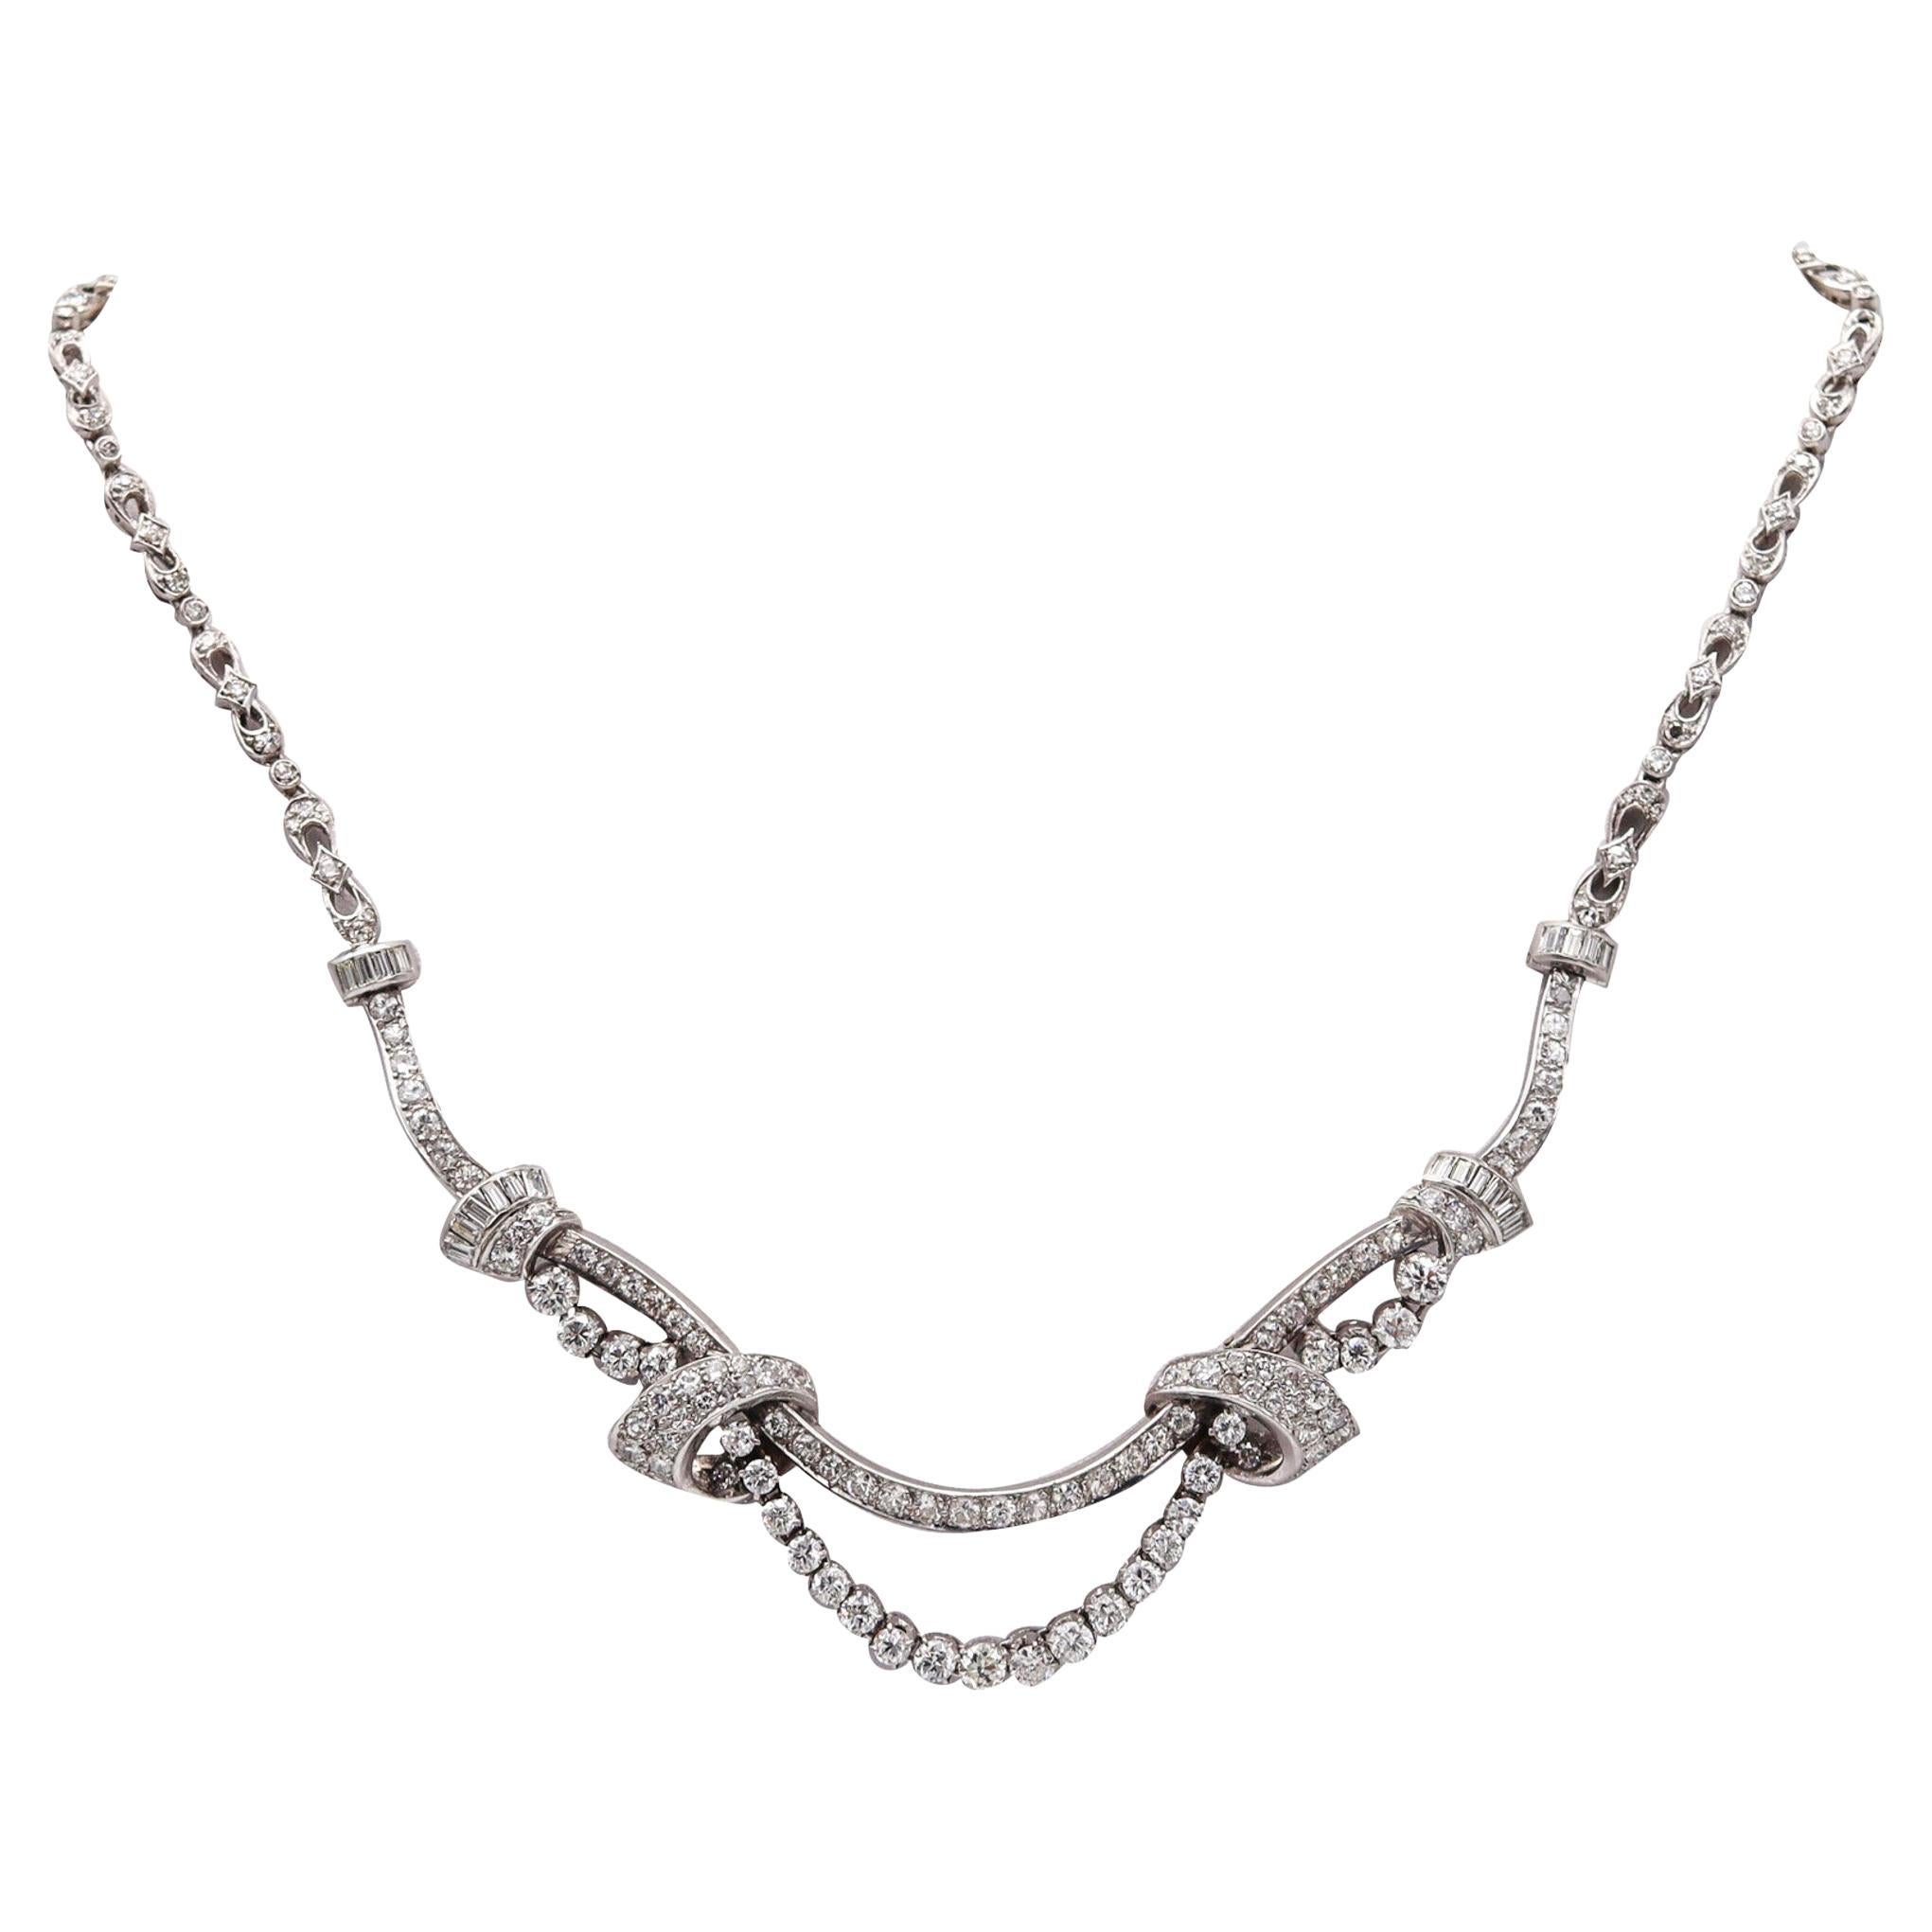 Art Deco 1935 American Garlands Necklace In Platinum With 12.68 Ctw In Diamonds For Sale